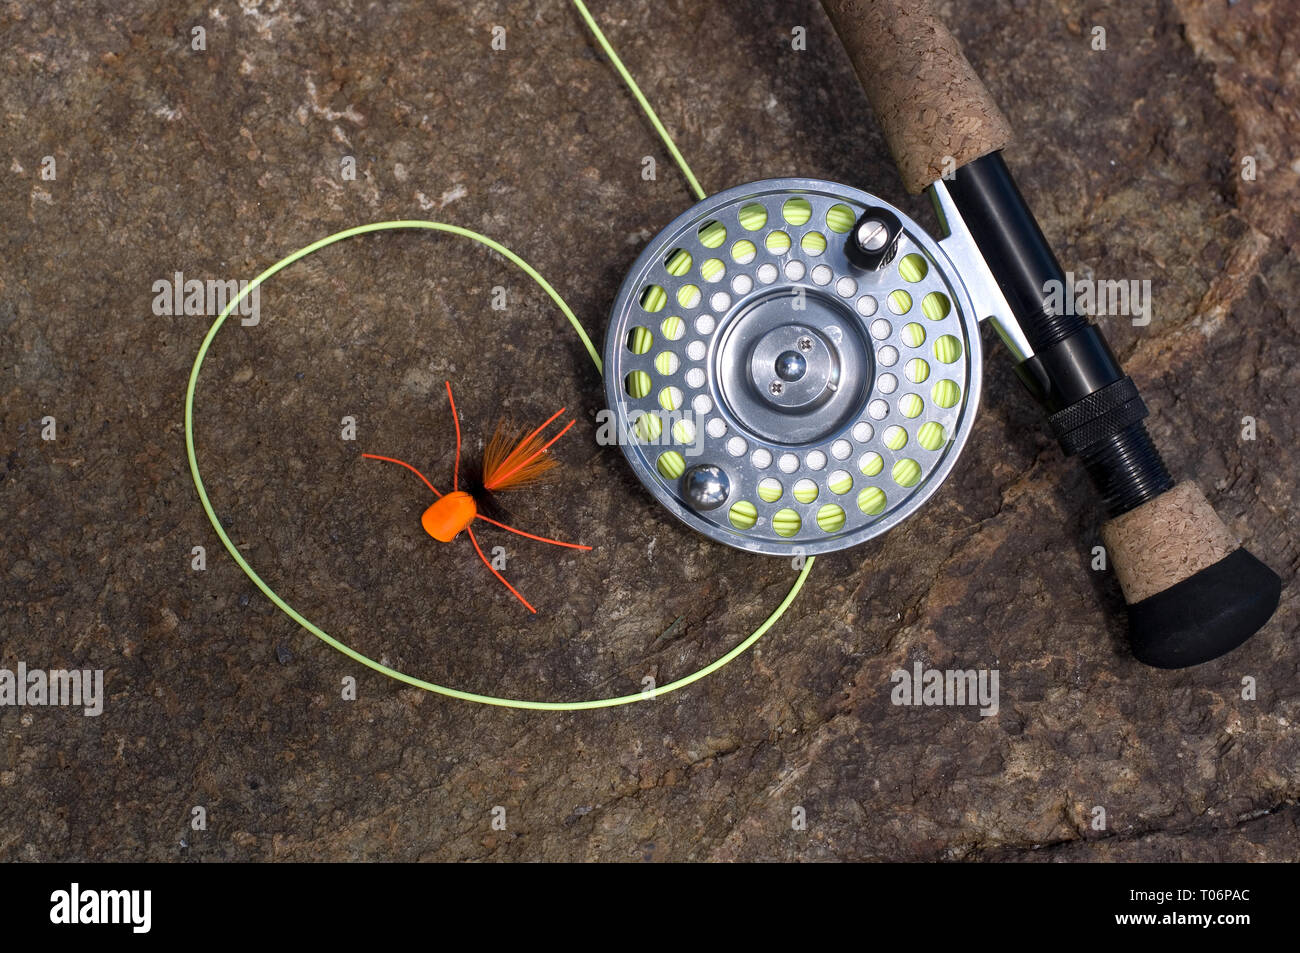 https://c8.alamy.com/comp/T06PAC/fly-fishing-rod-and-reel-with-orange-spider-lure-on-wet-rocks-T06PAC.jpg